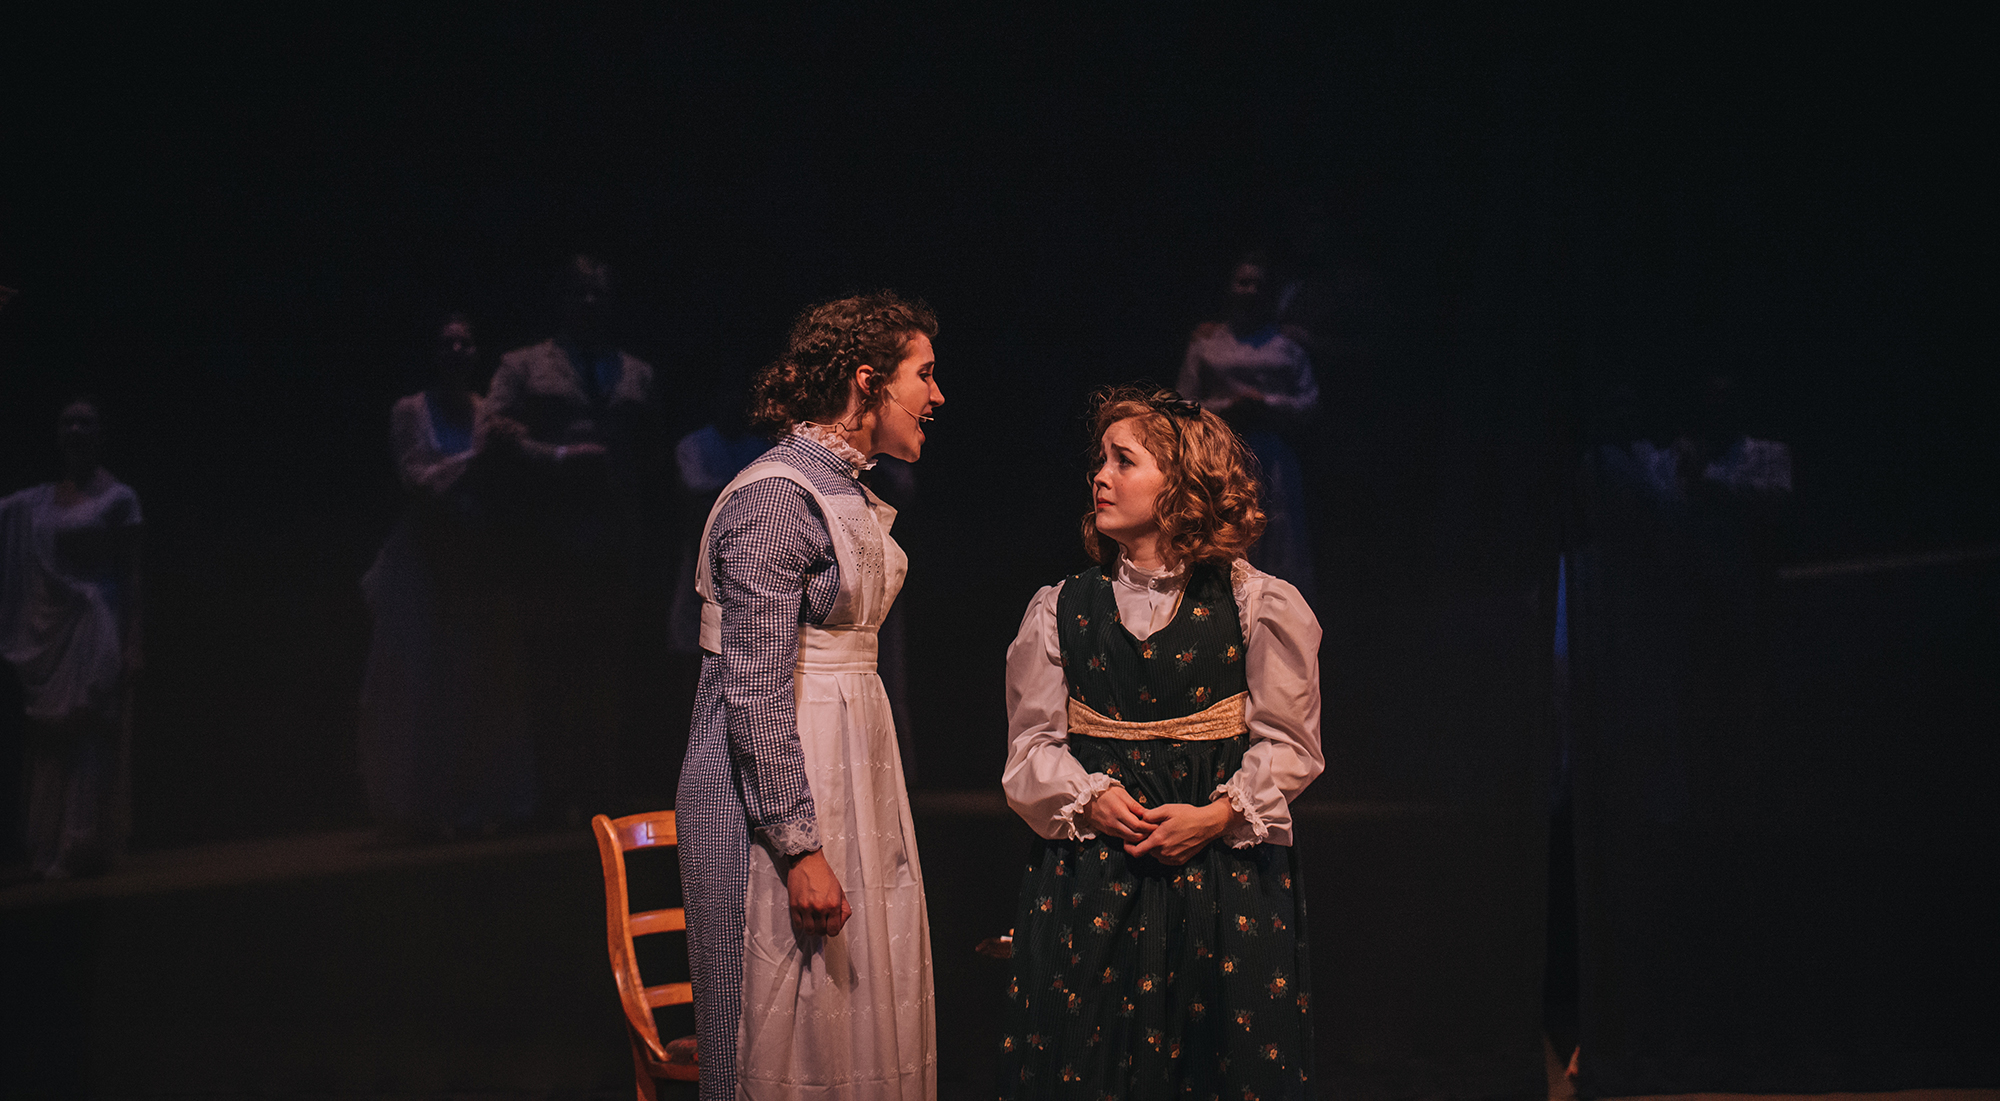 Hannah Hill (at left) was selected as a finalist in the festival’s Musical Theatre Initiative Singing/Acting Competition; she was nominated for her role in Ouachita’s production of The Secret Garden.